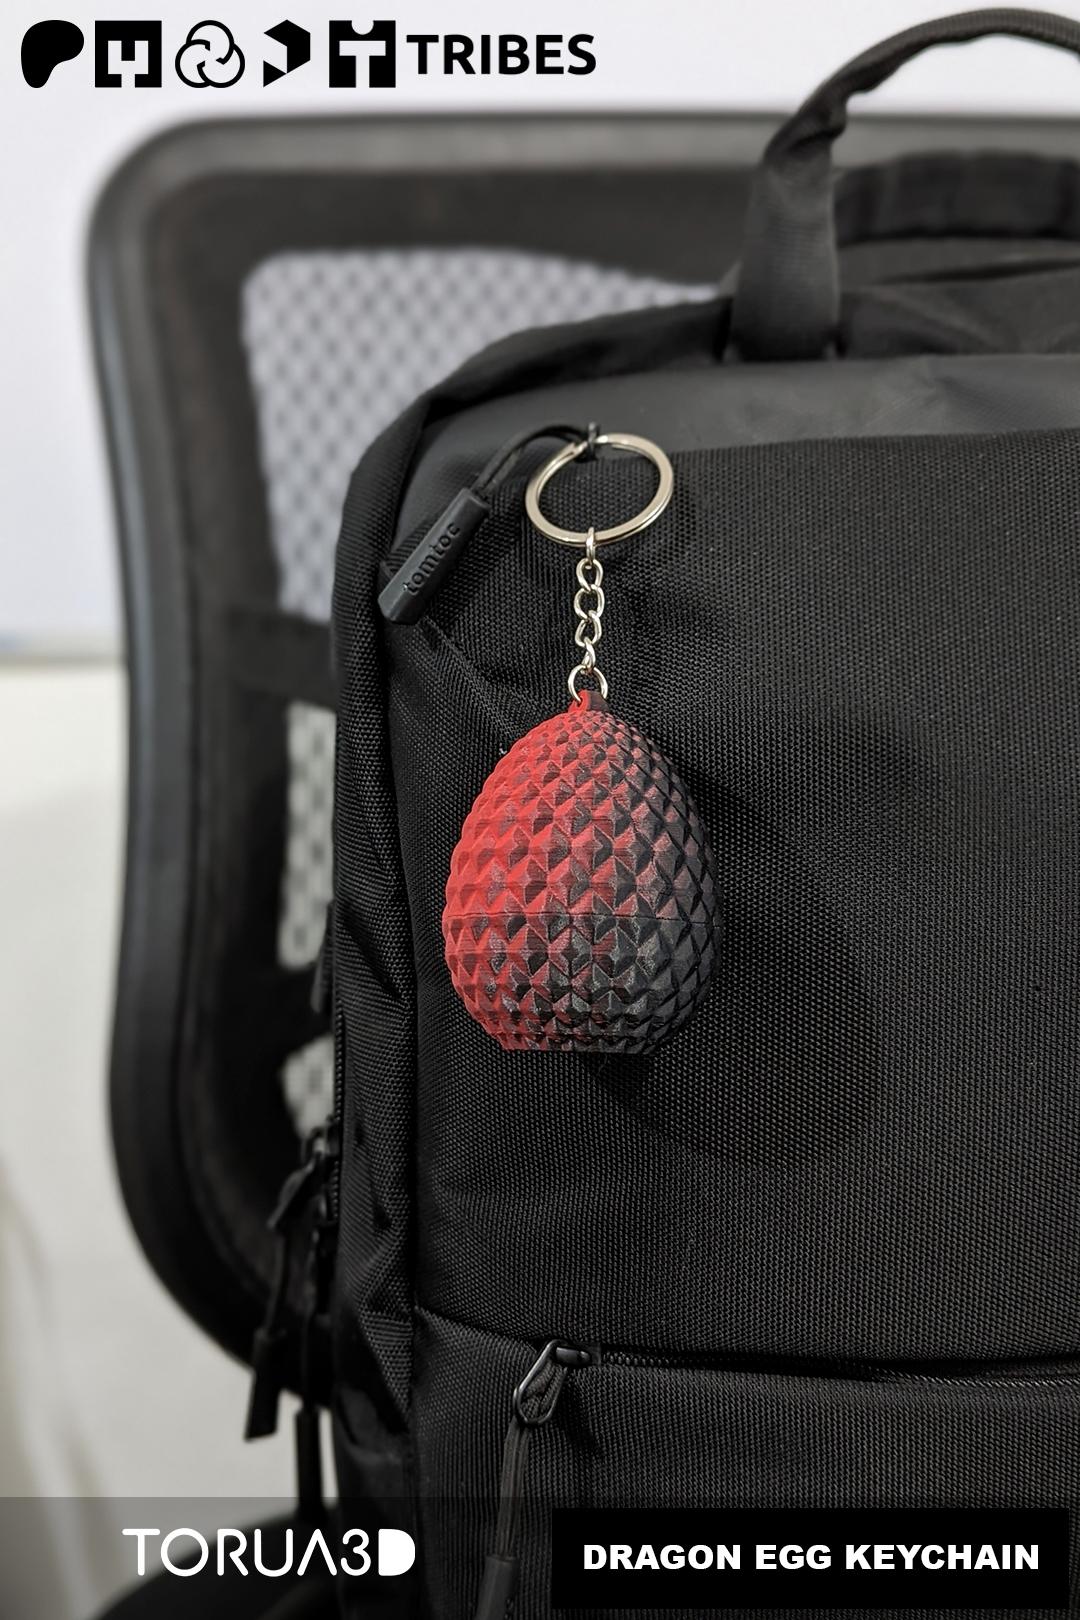 Dragon egg Keychain - Print in place 3d model